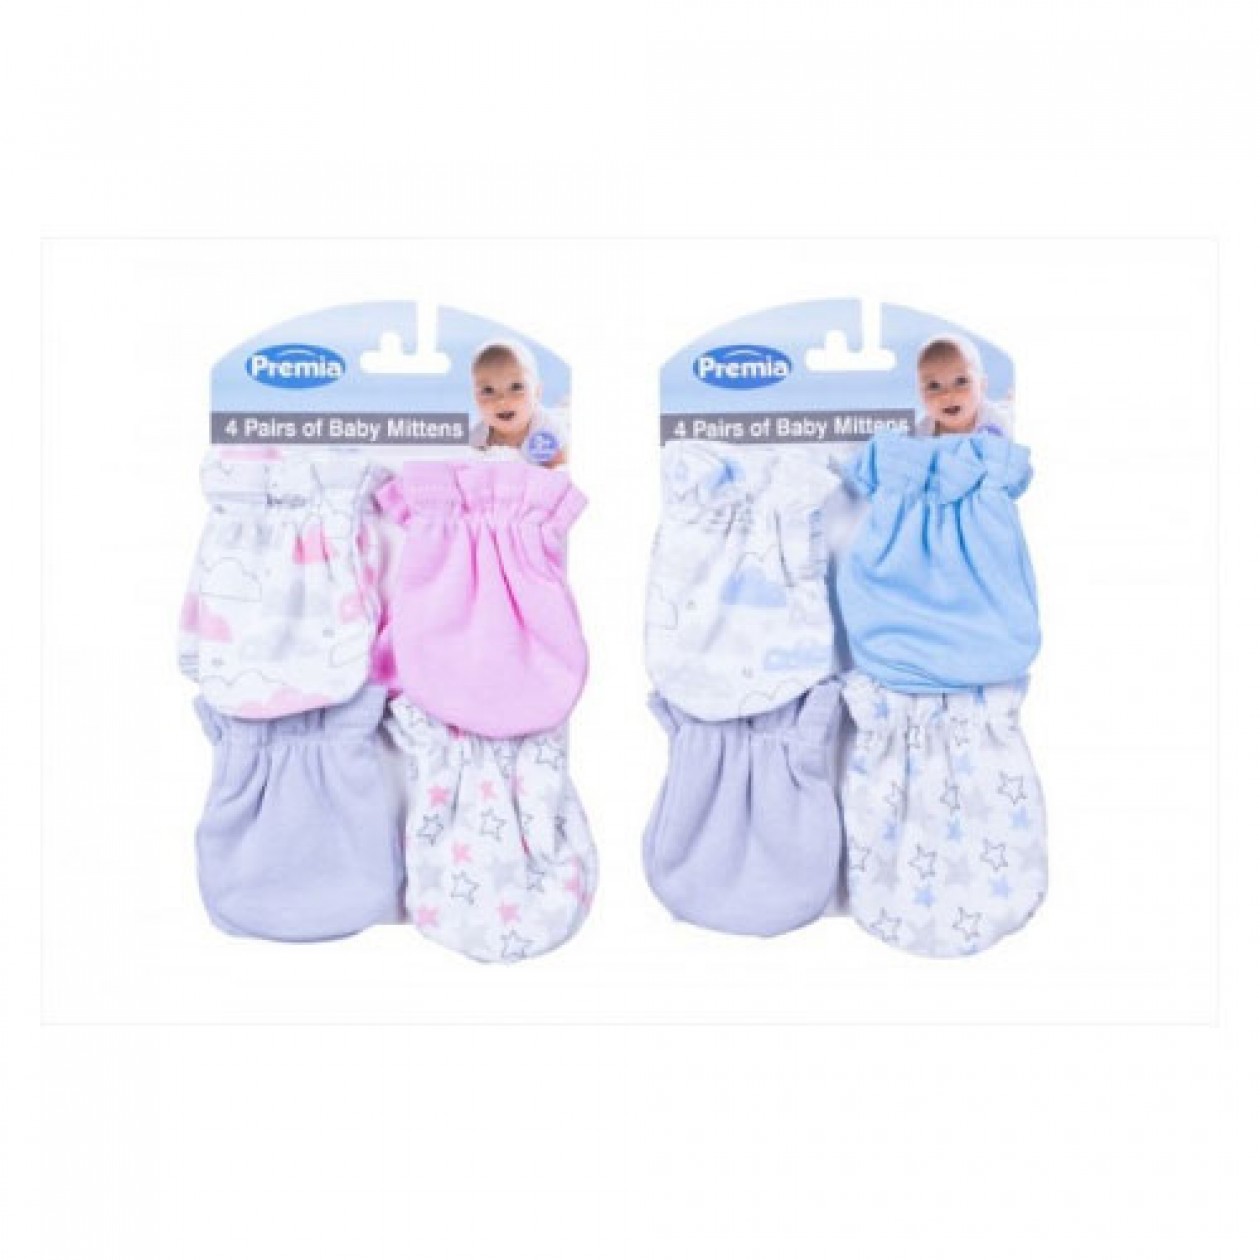 Premia Baby Mittens Assorted 4 Pairs